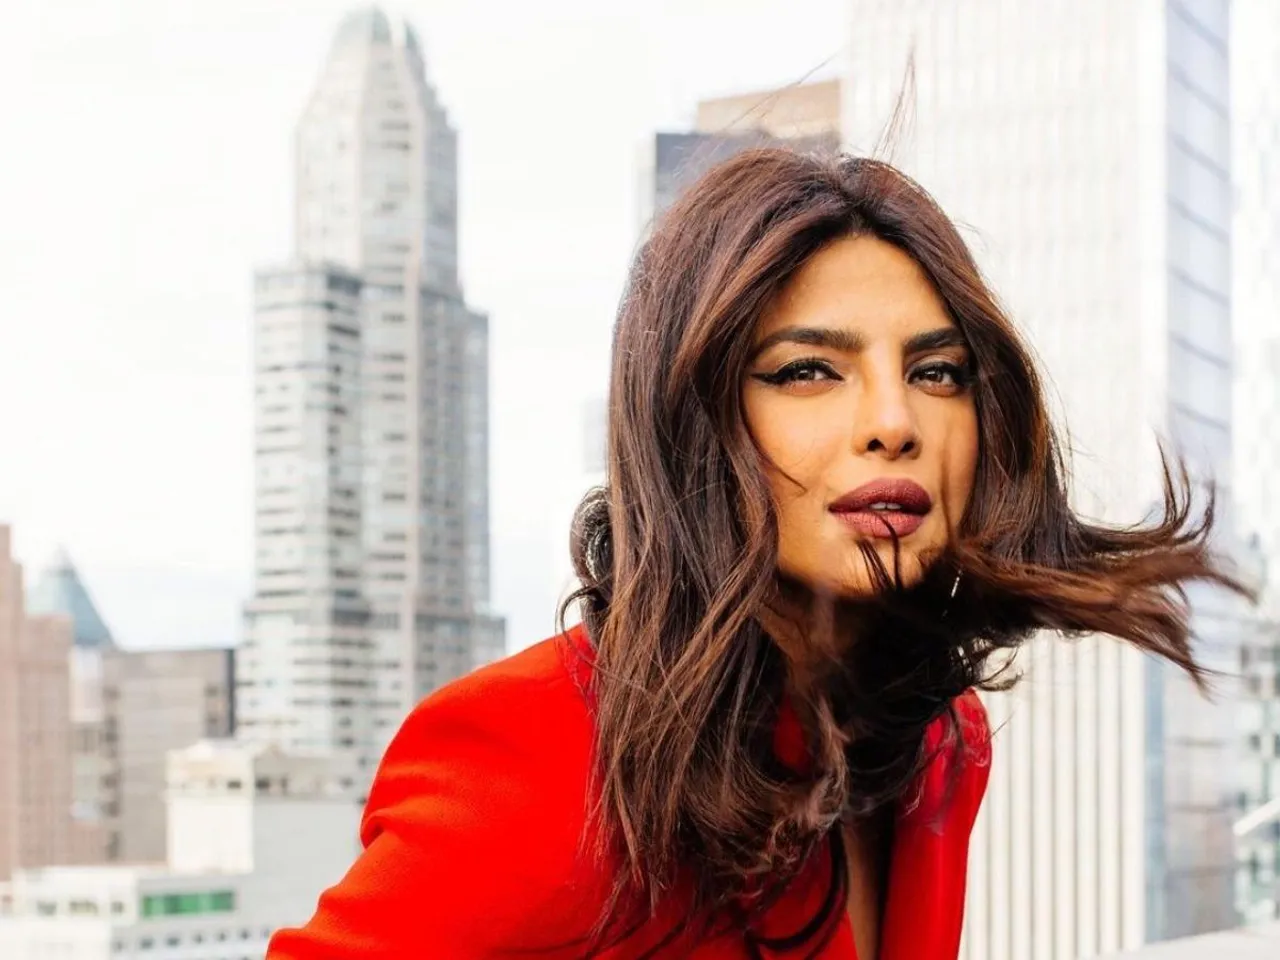 Priyanka on promoting South Asian talent in Hollywood: Want to help others